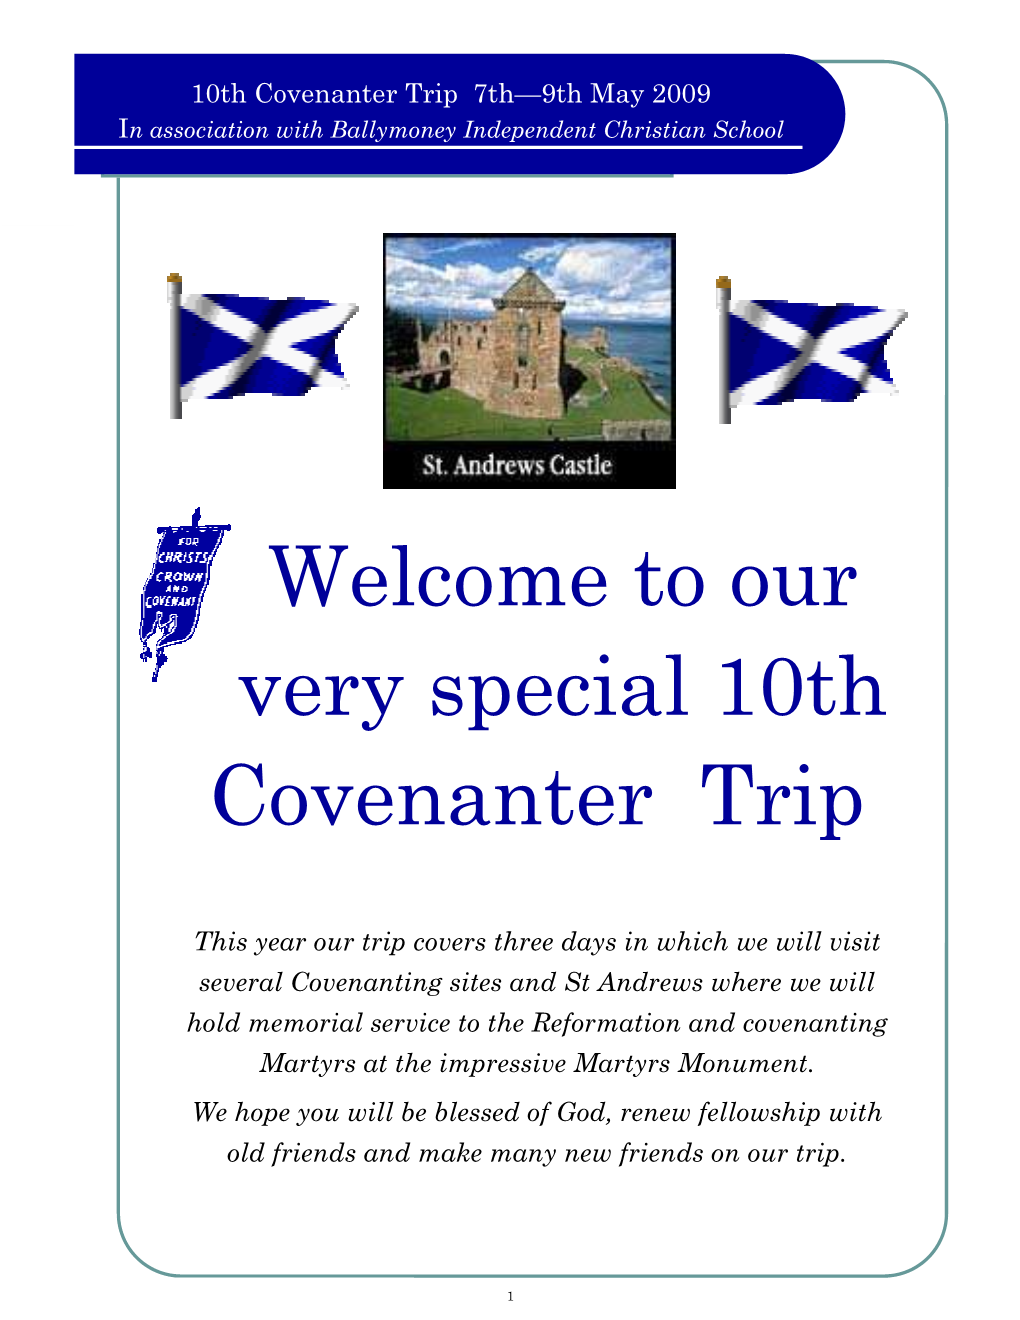 Our Very Special 10Th Covenanter Trip